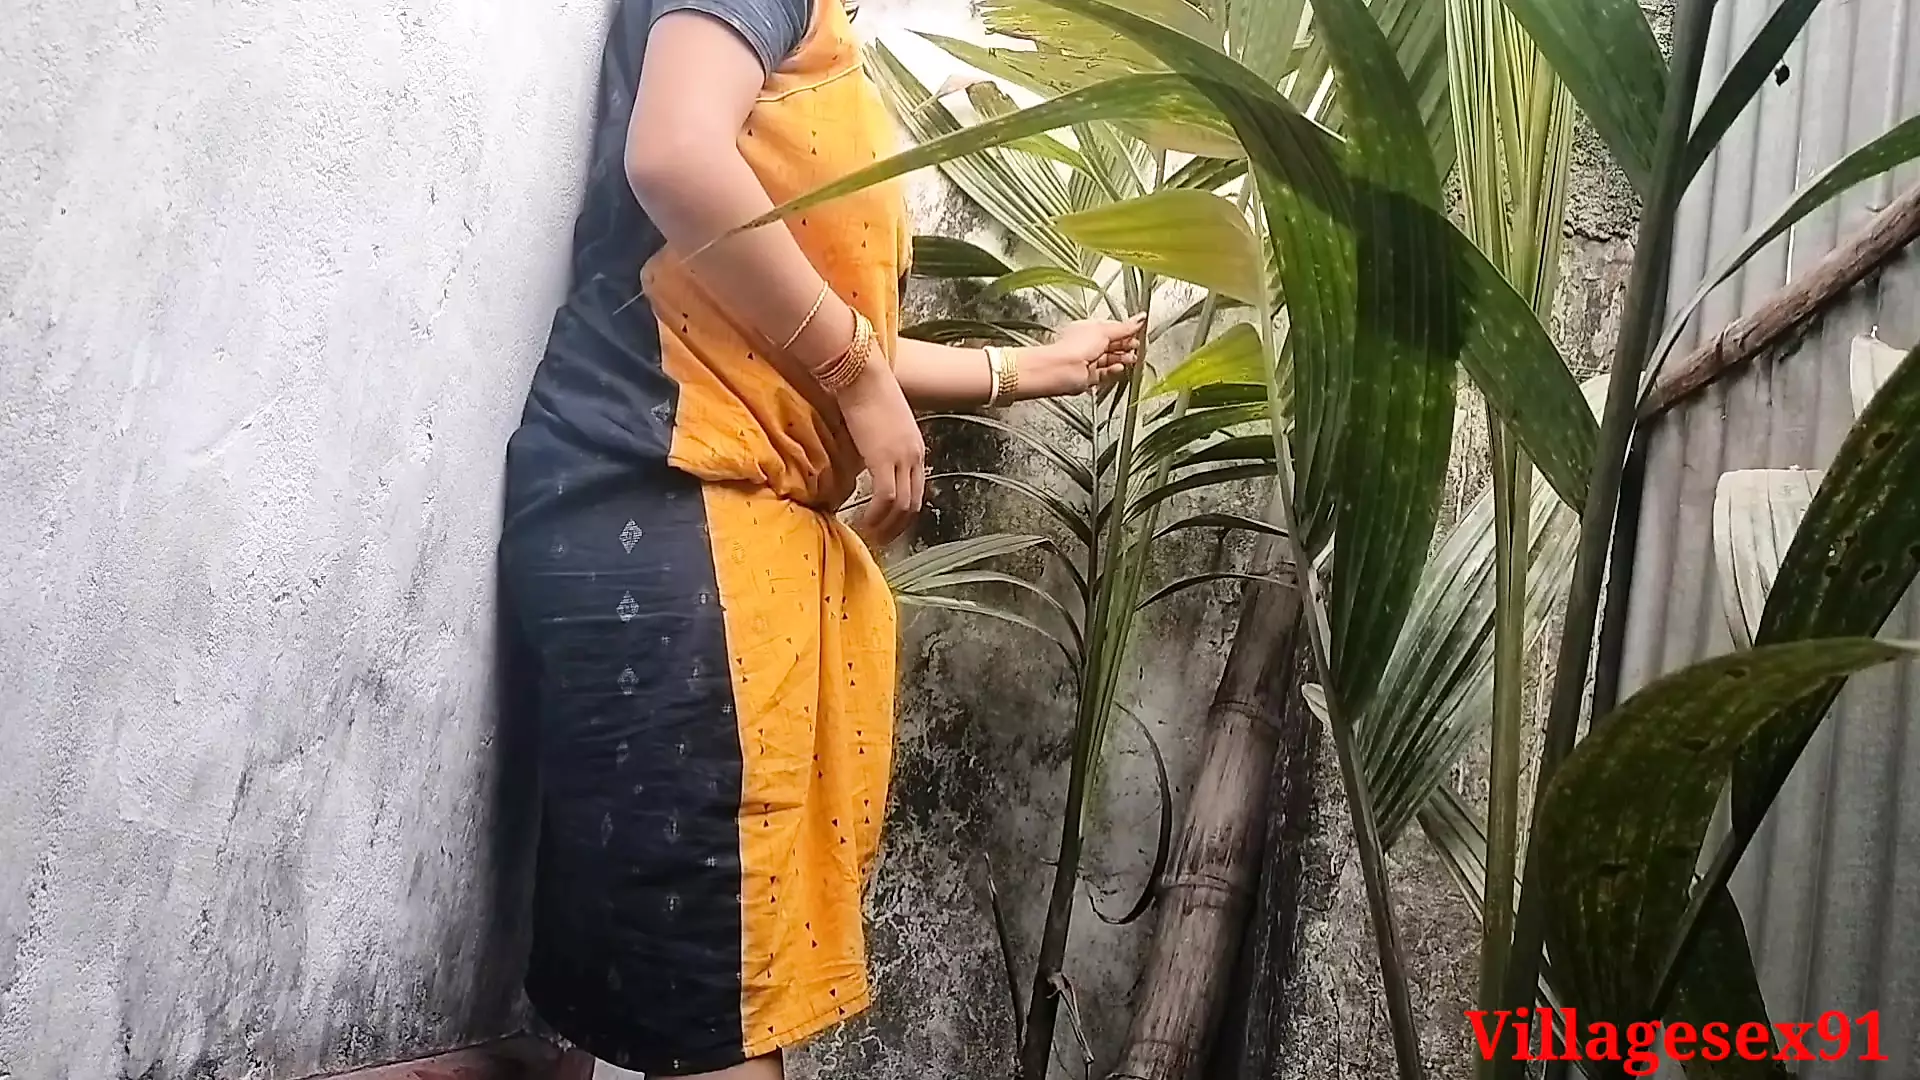 Mama Sex In Out of Home In Outdoor ( Official Movie Scene By Villagesex91 ) watch online pic